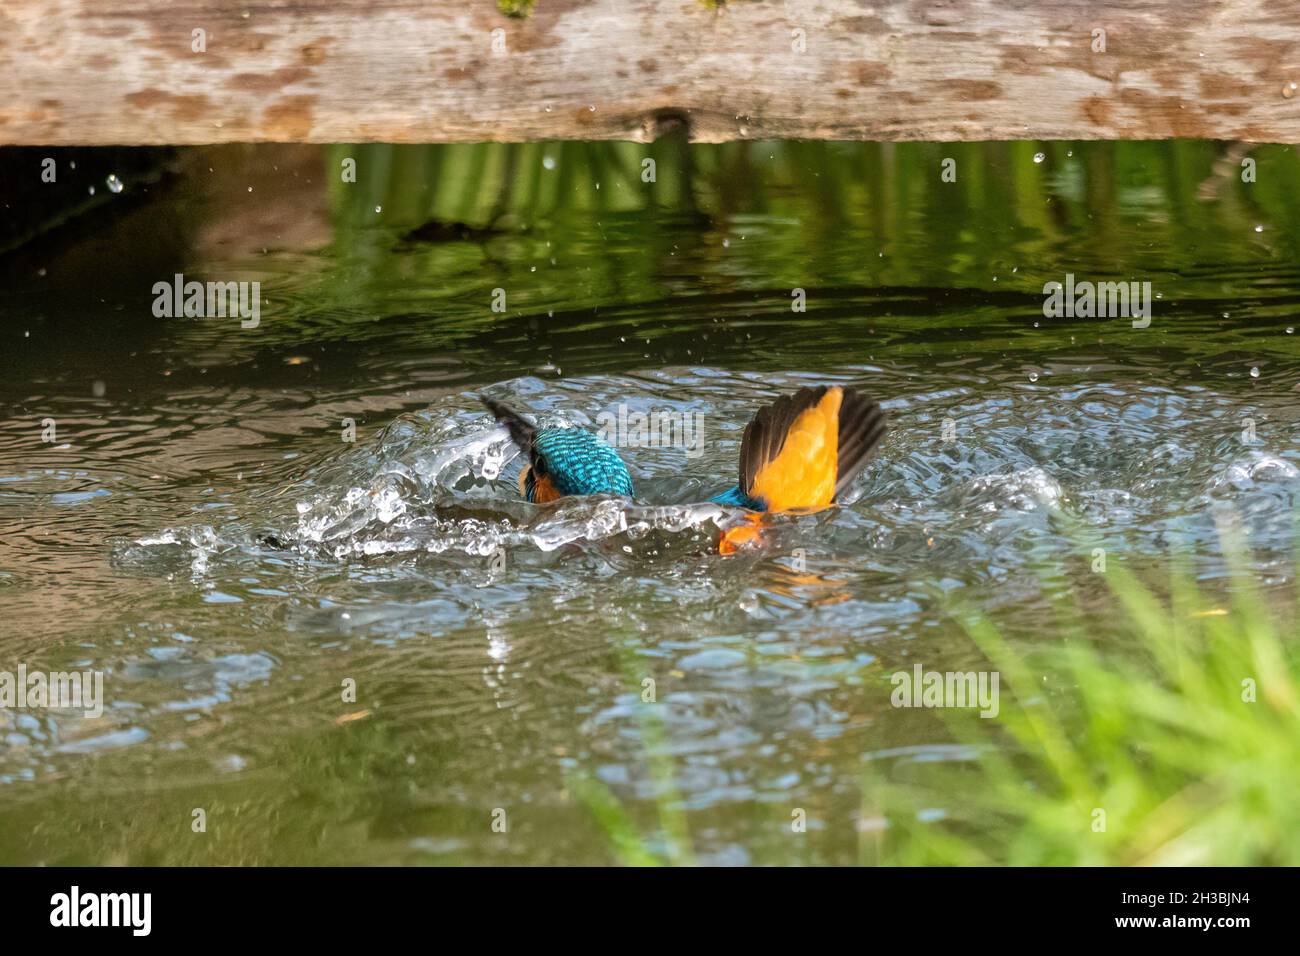 Kingfisher (Alcedo atthis), a colourful british bird, having a bath in a pond, UK Stock Photo